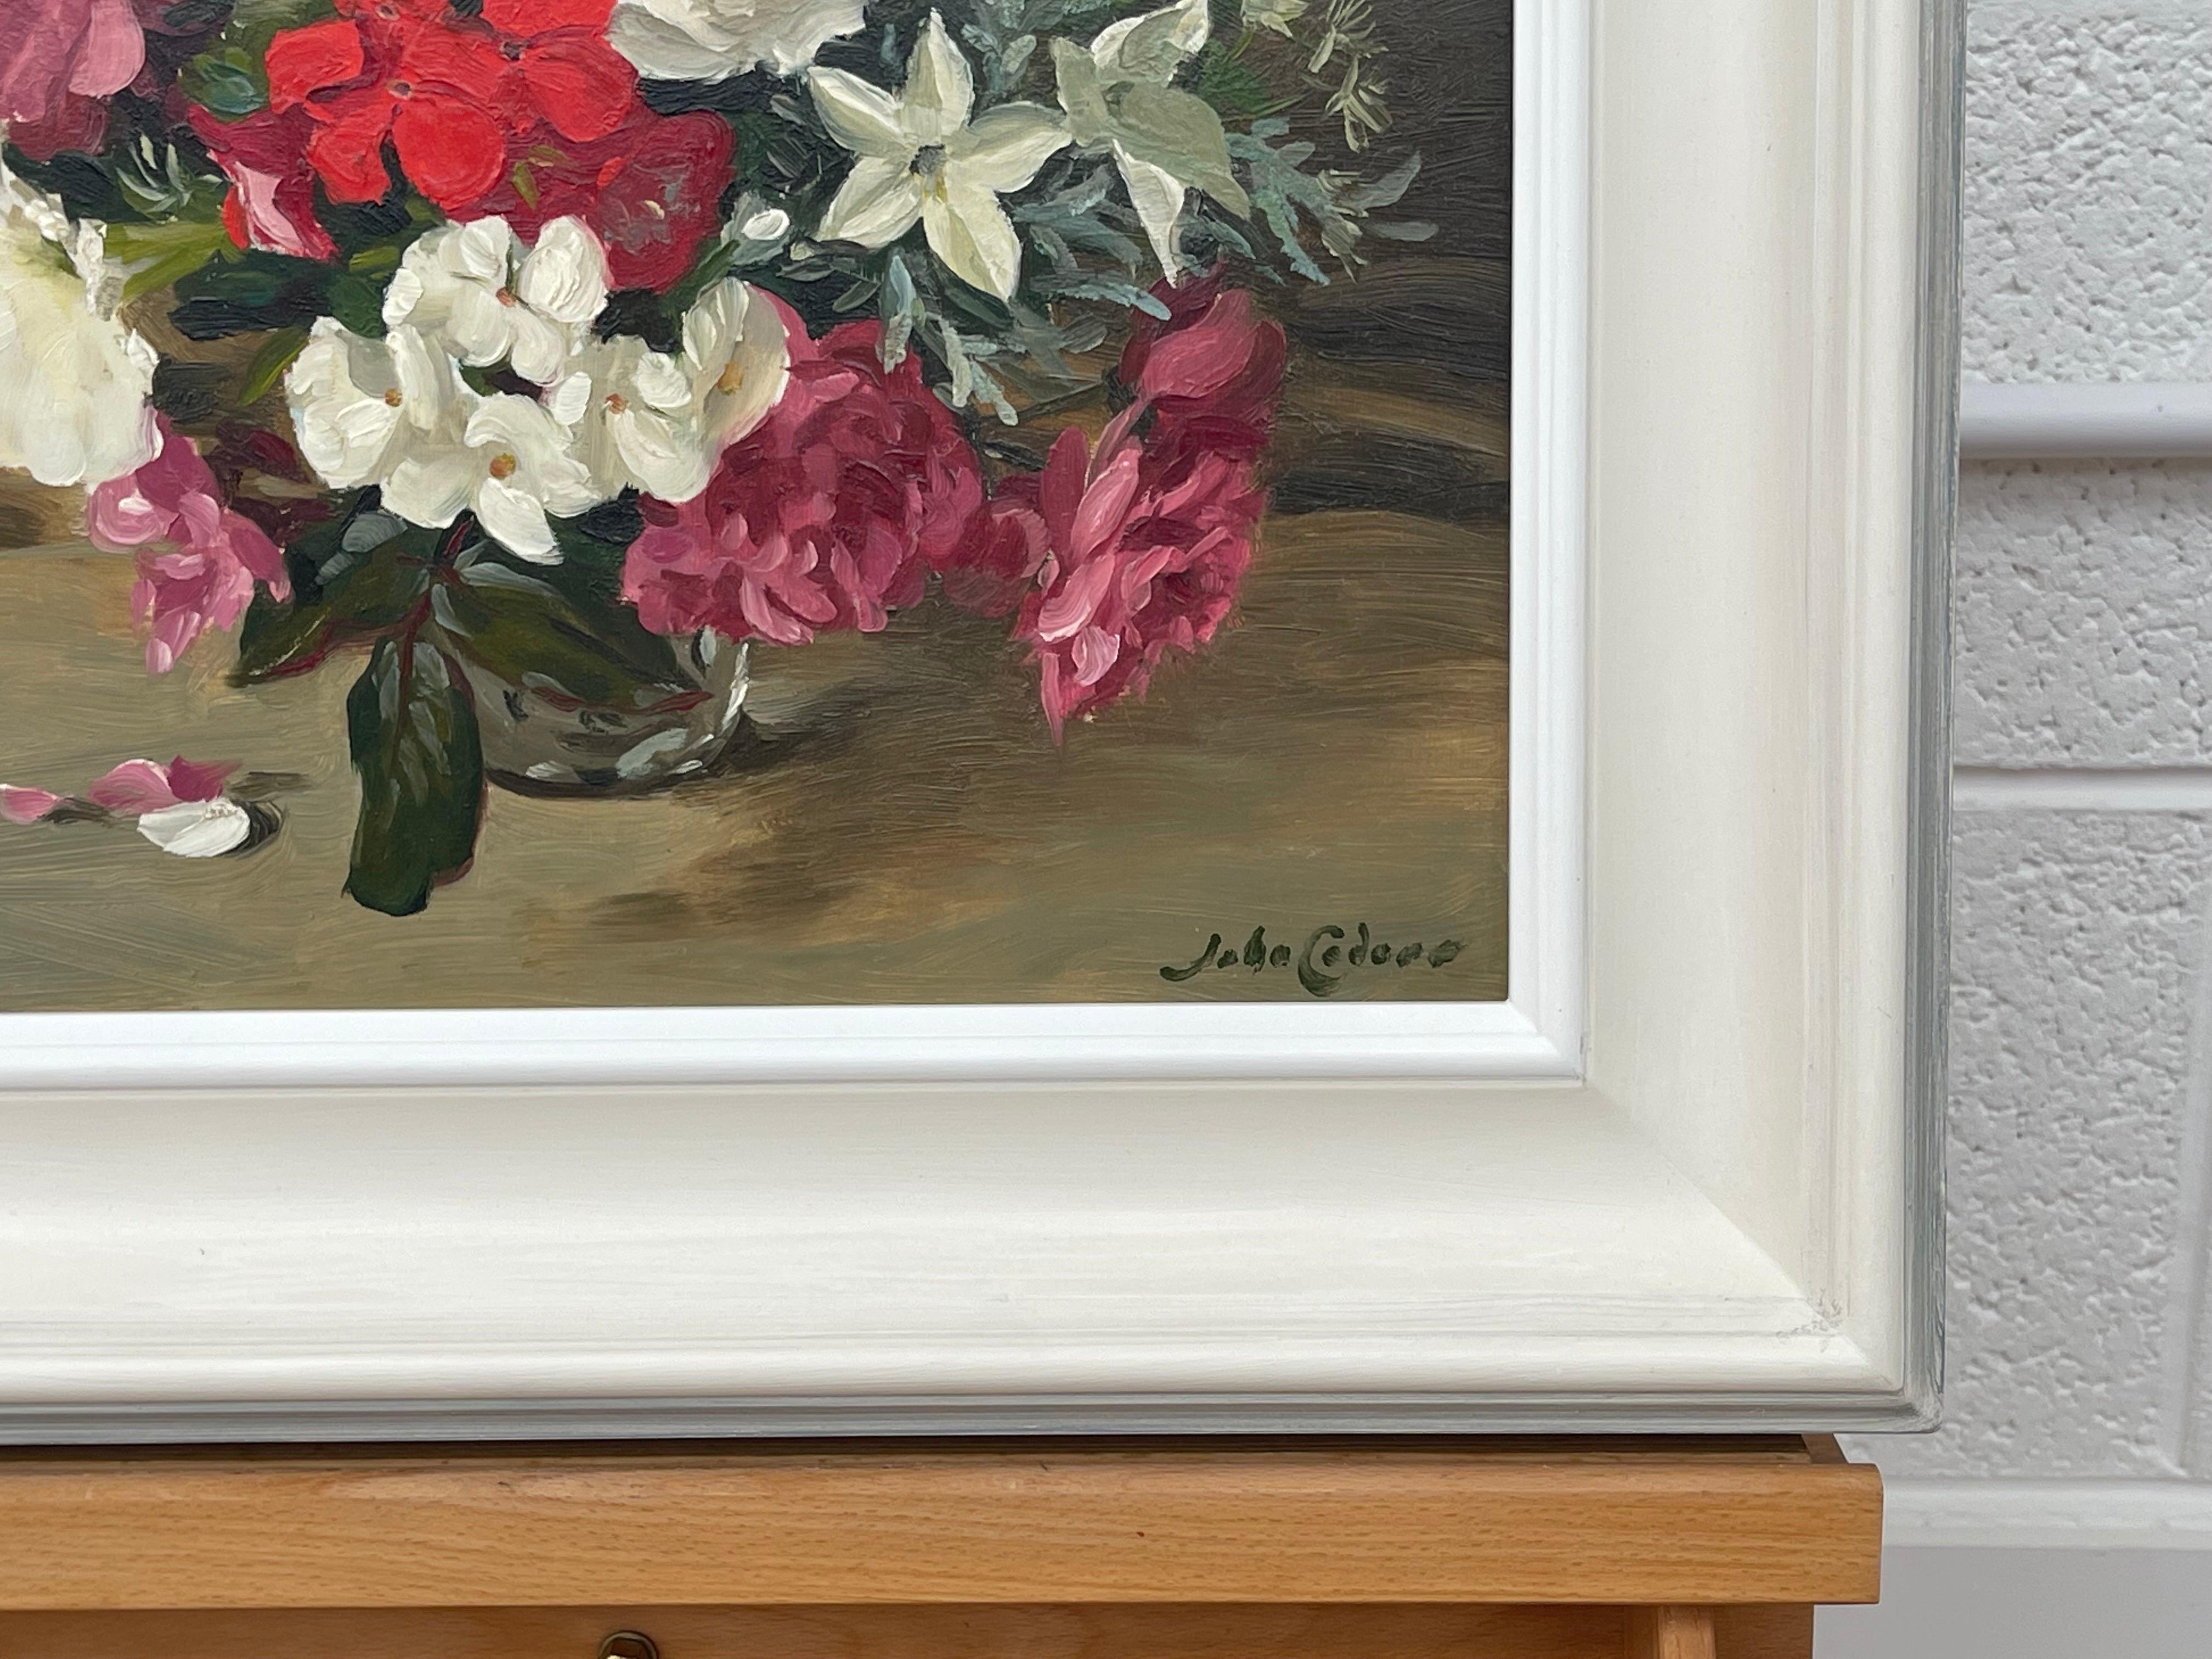 Still Life Oil Painting of Assorted Red, Pink & White Summer Flowers in a Vase by 20th Century British Artist, John Whitlock Codner RWA (1913-2008) 

Art measures 14 x 12 inches
Frame measures 20 x 18 inches 

Presented in the highest quality